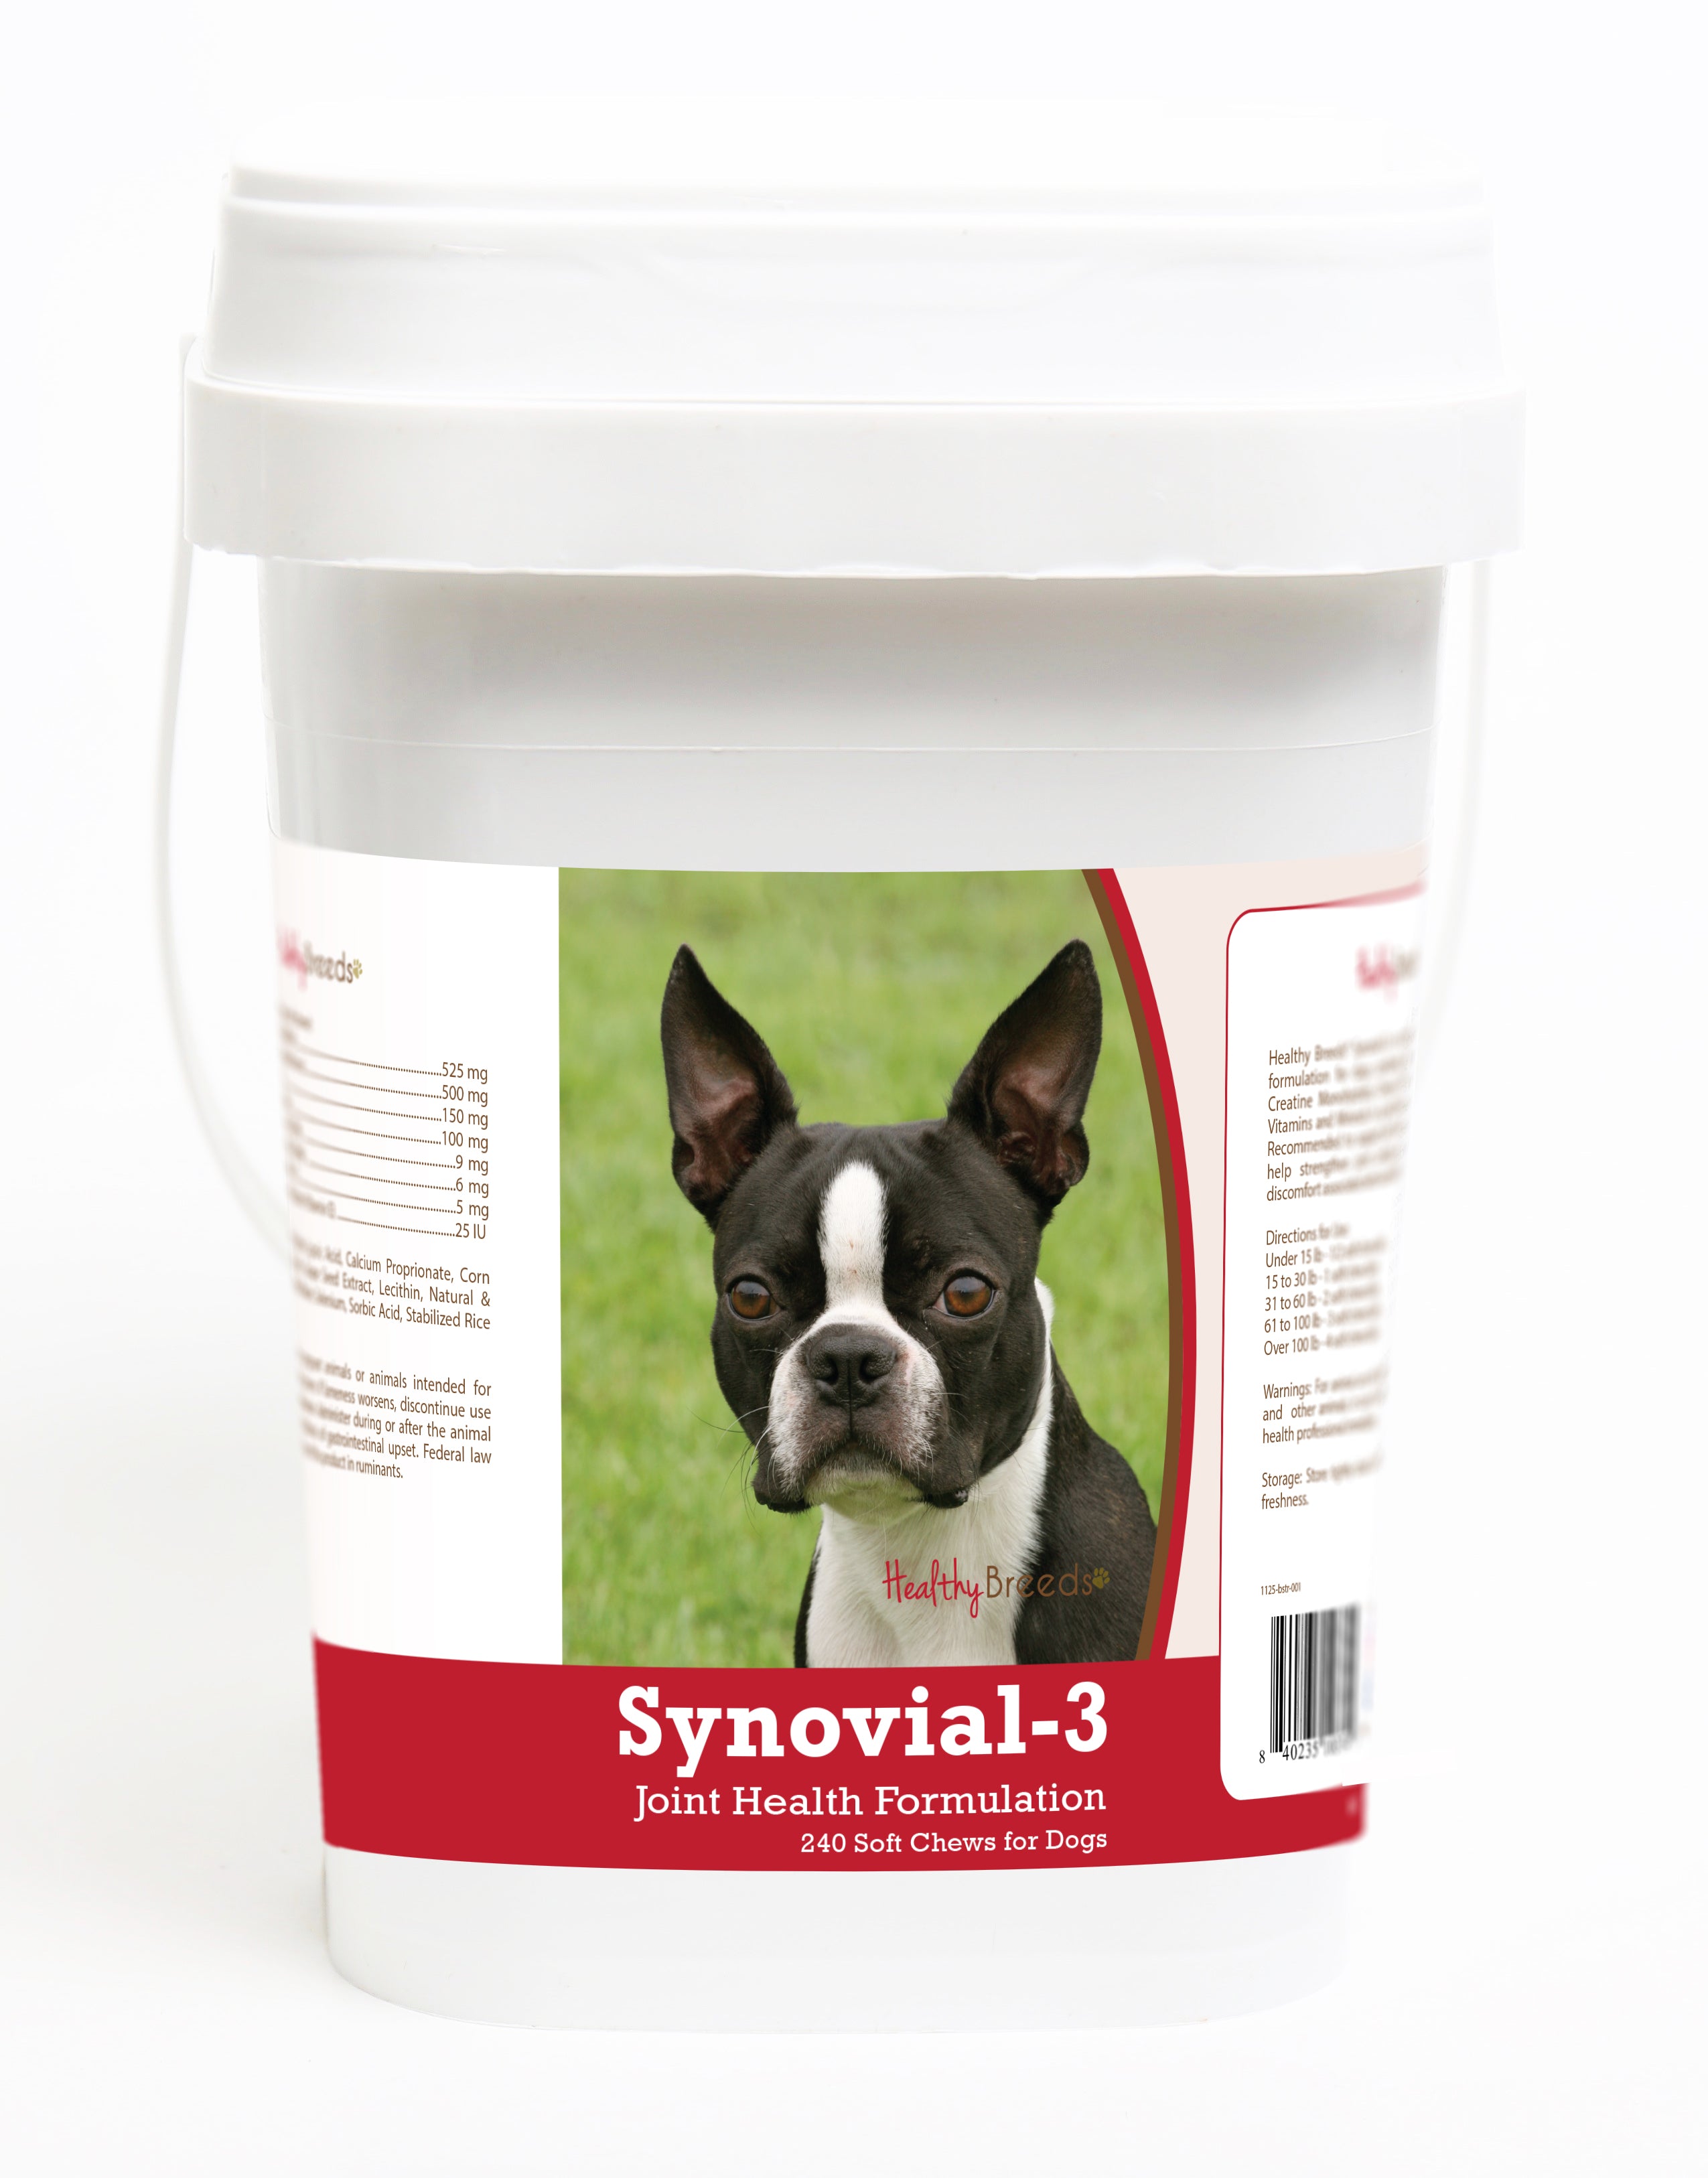 Boston Terrier Synovial-3 Joint Health Formulation Soft Chews 240 Count